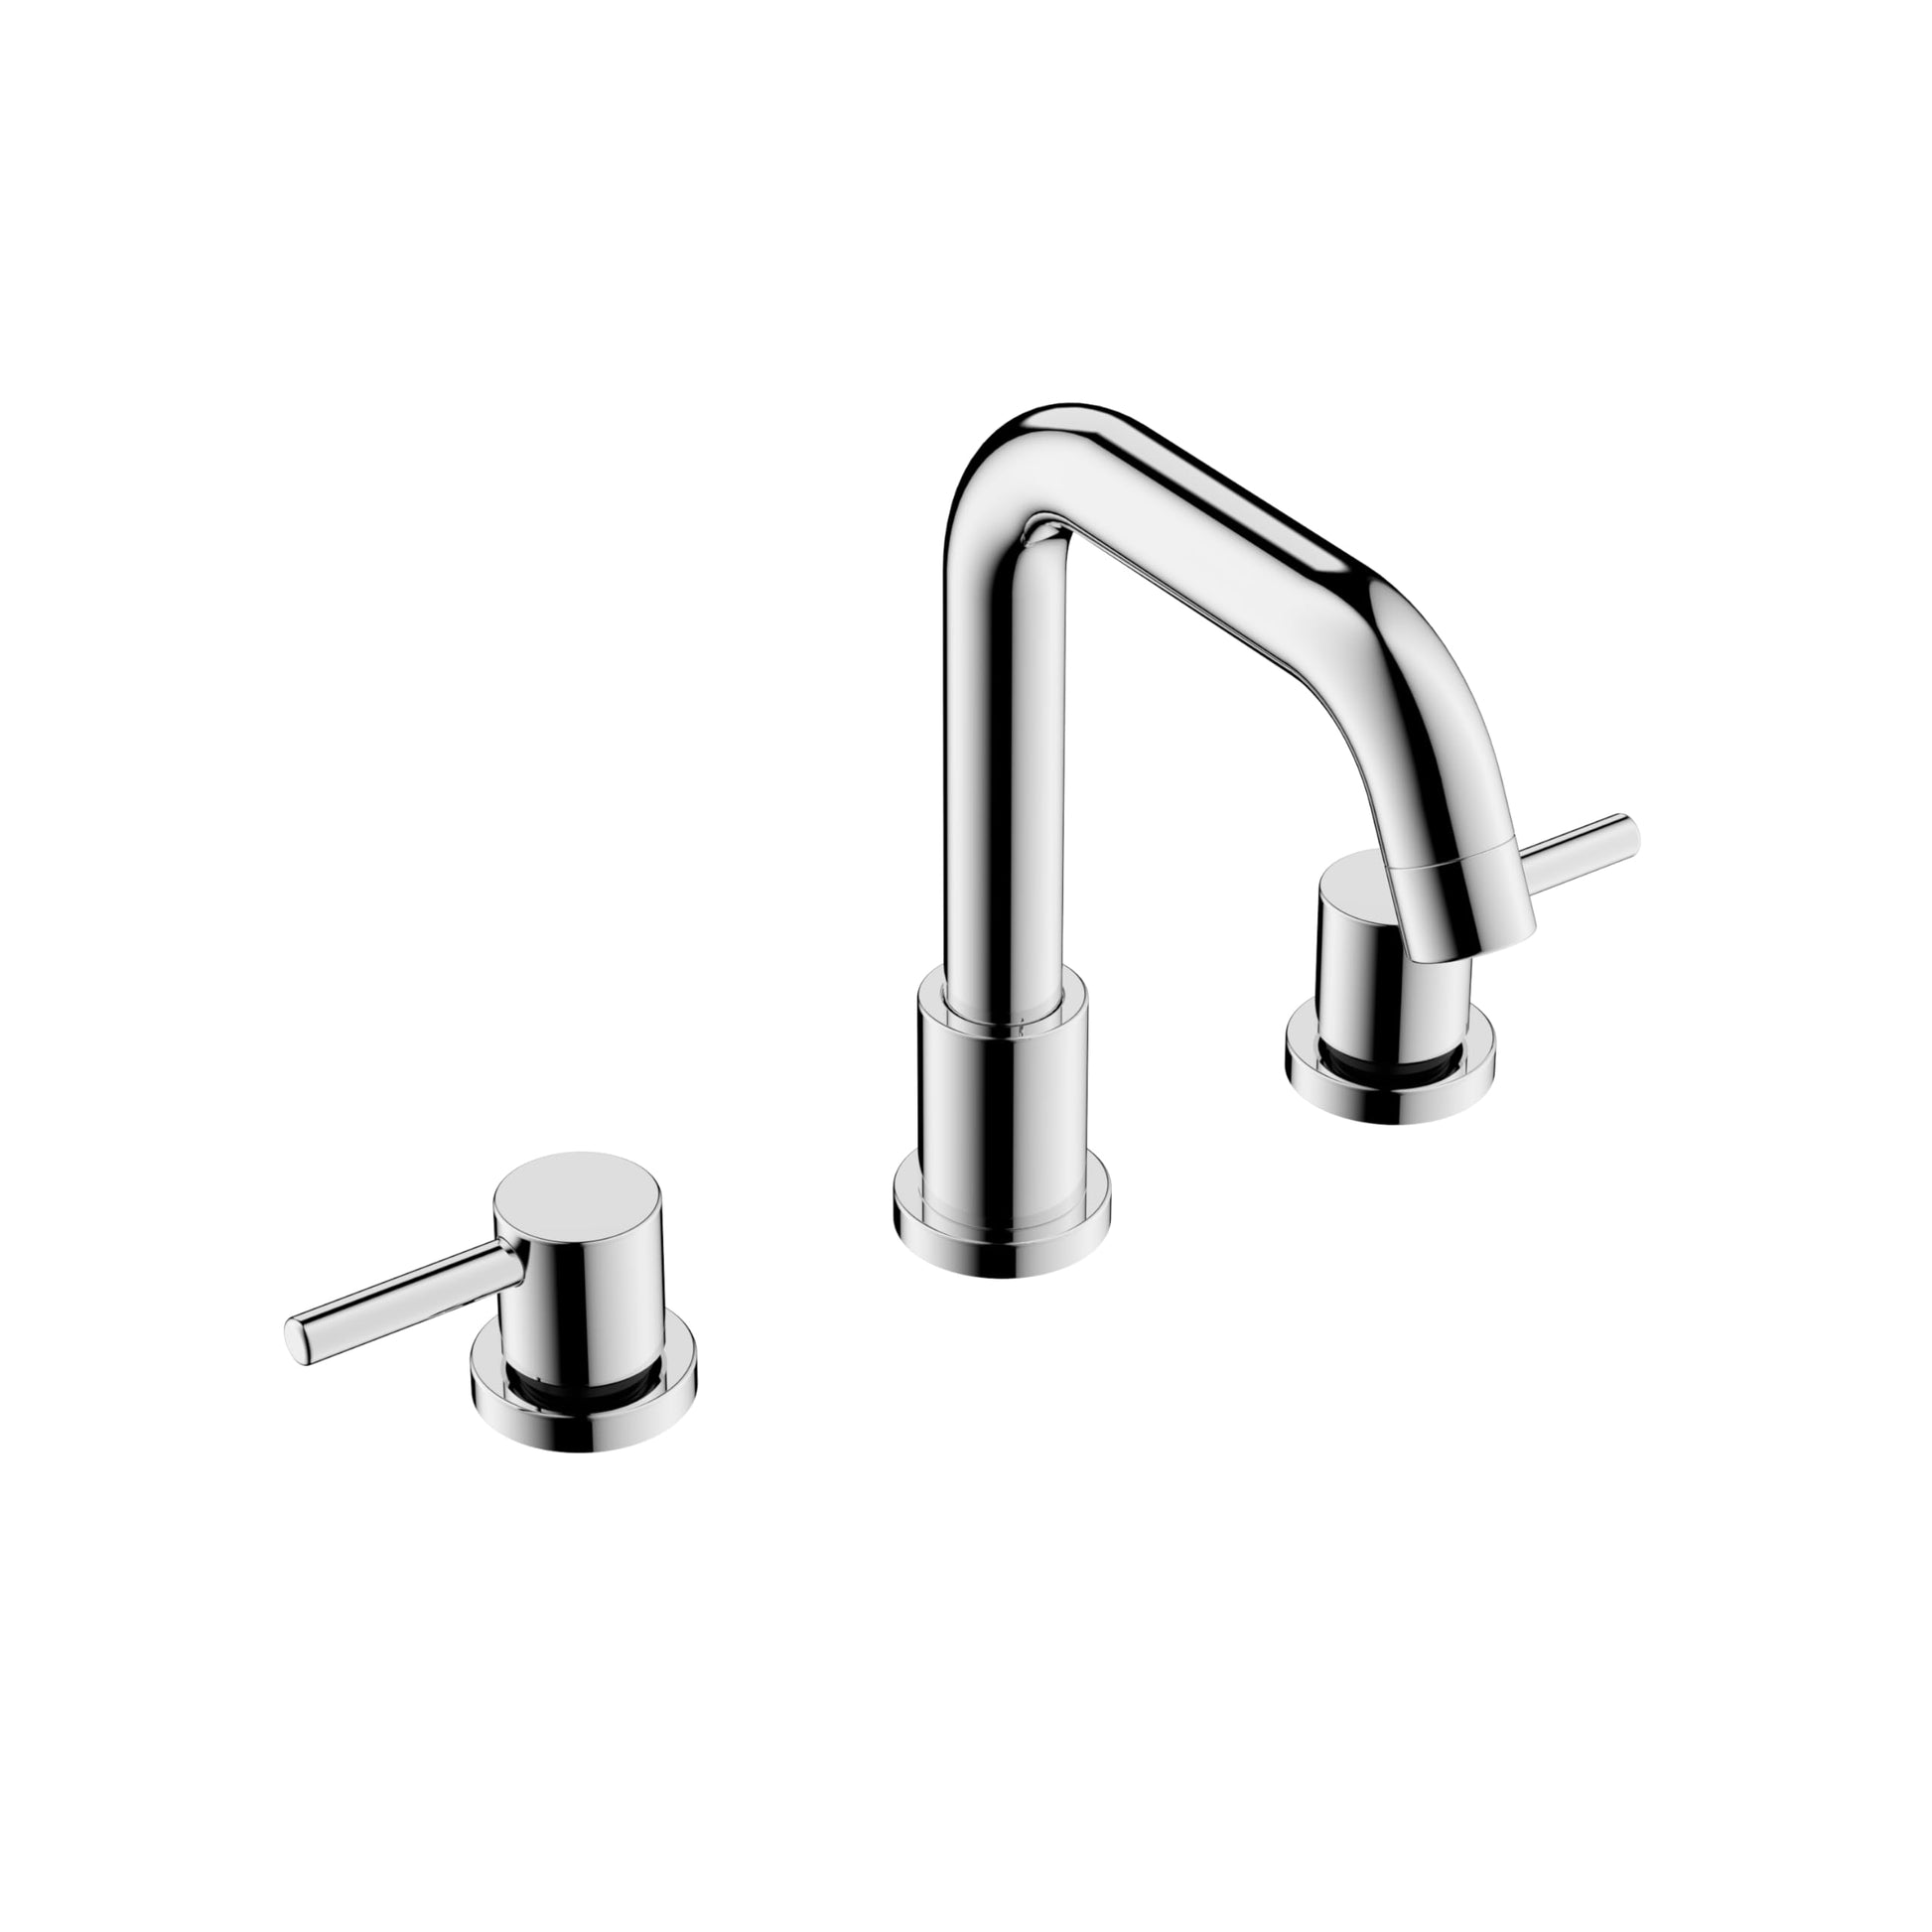 Bathroom Faucets for Sink 3 Hole - Chrome Bathroom Faucet with Pop-up Drain, 8 Inch Widespread Bathroom Sink Faucet 2-Handles, Modern Vanity Faucet with Supply Lines